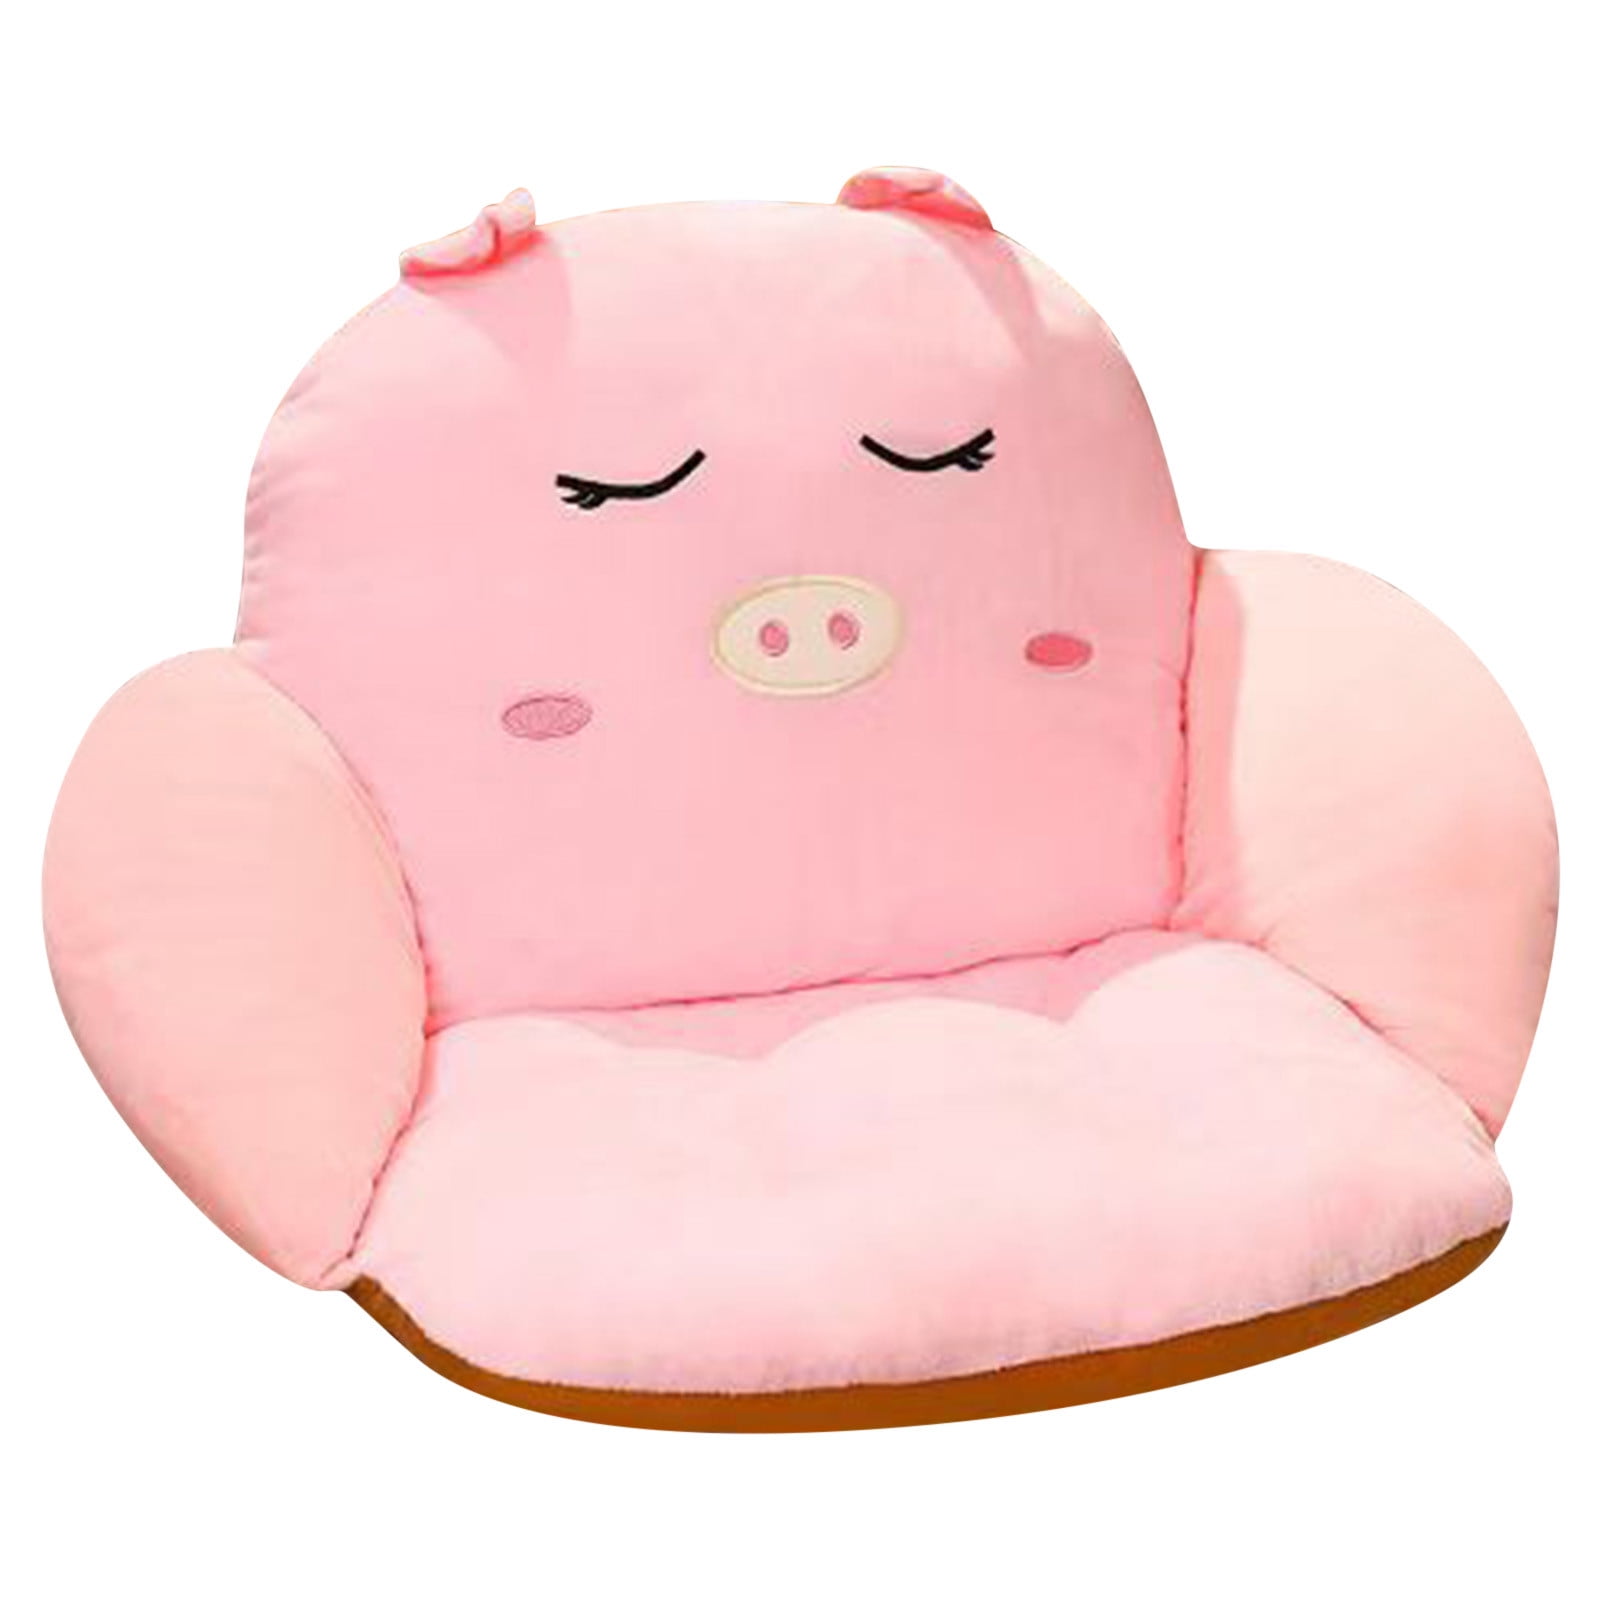  NUTEOR Chair Cushion Comfy Cute Seat Cushions, Kawaii Sofa  Floor Pillow Cute Plush Seat Pad for Gamer Chair, Cozy Pillows for Girl  Office Worker Gift, Dining Room Bedroom Decor(18 * 20in) (